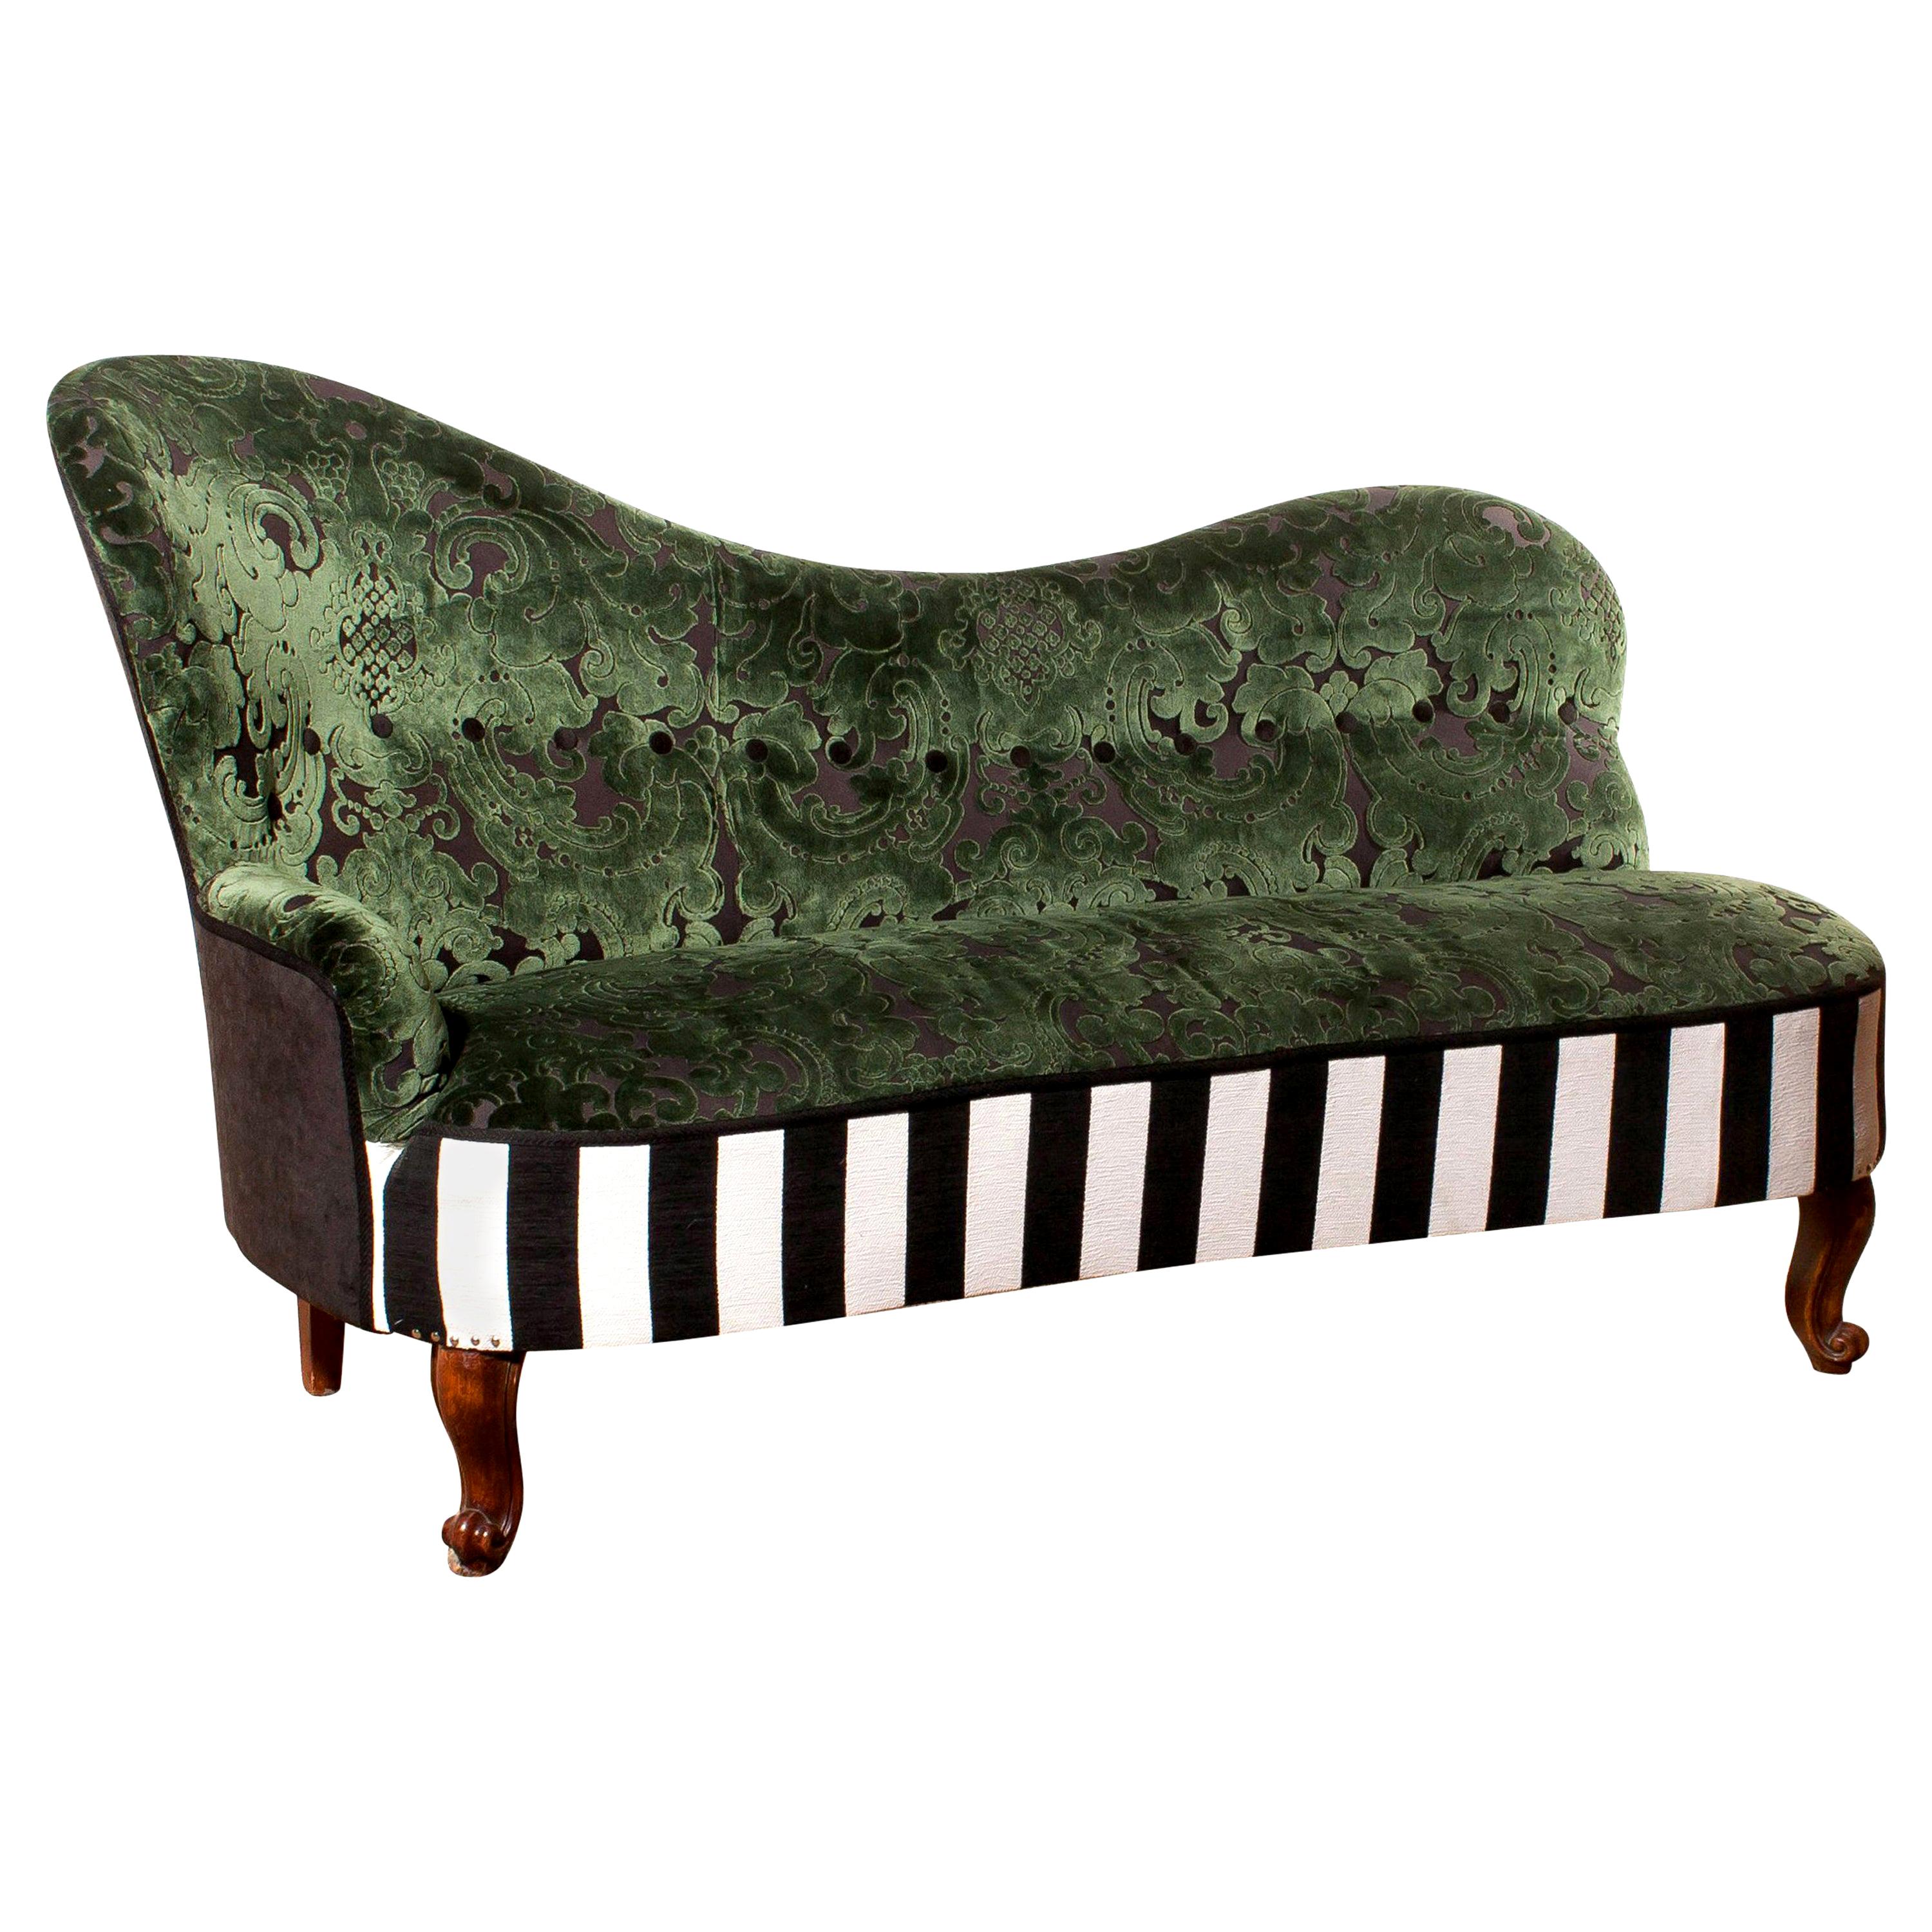 A very beautiful sofa or daybed.
This chaise lounge is reupholstered with green jacquard velvet and a black and white stripe chenille fabric.
It is in wonderful condition.
Period 1950s
Dimensions: H 100 cm x W 170 cm x D 75 cm x SH 44 cm.